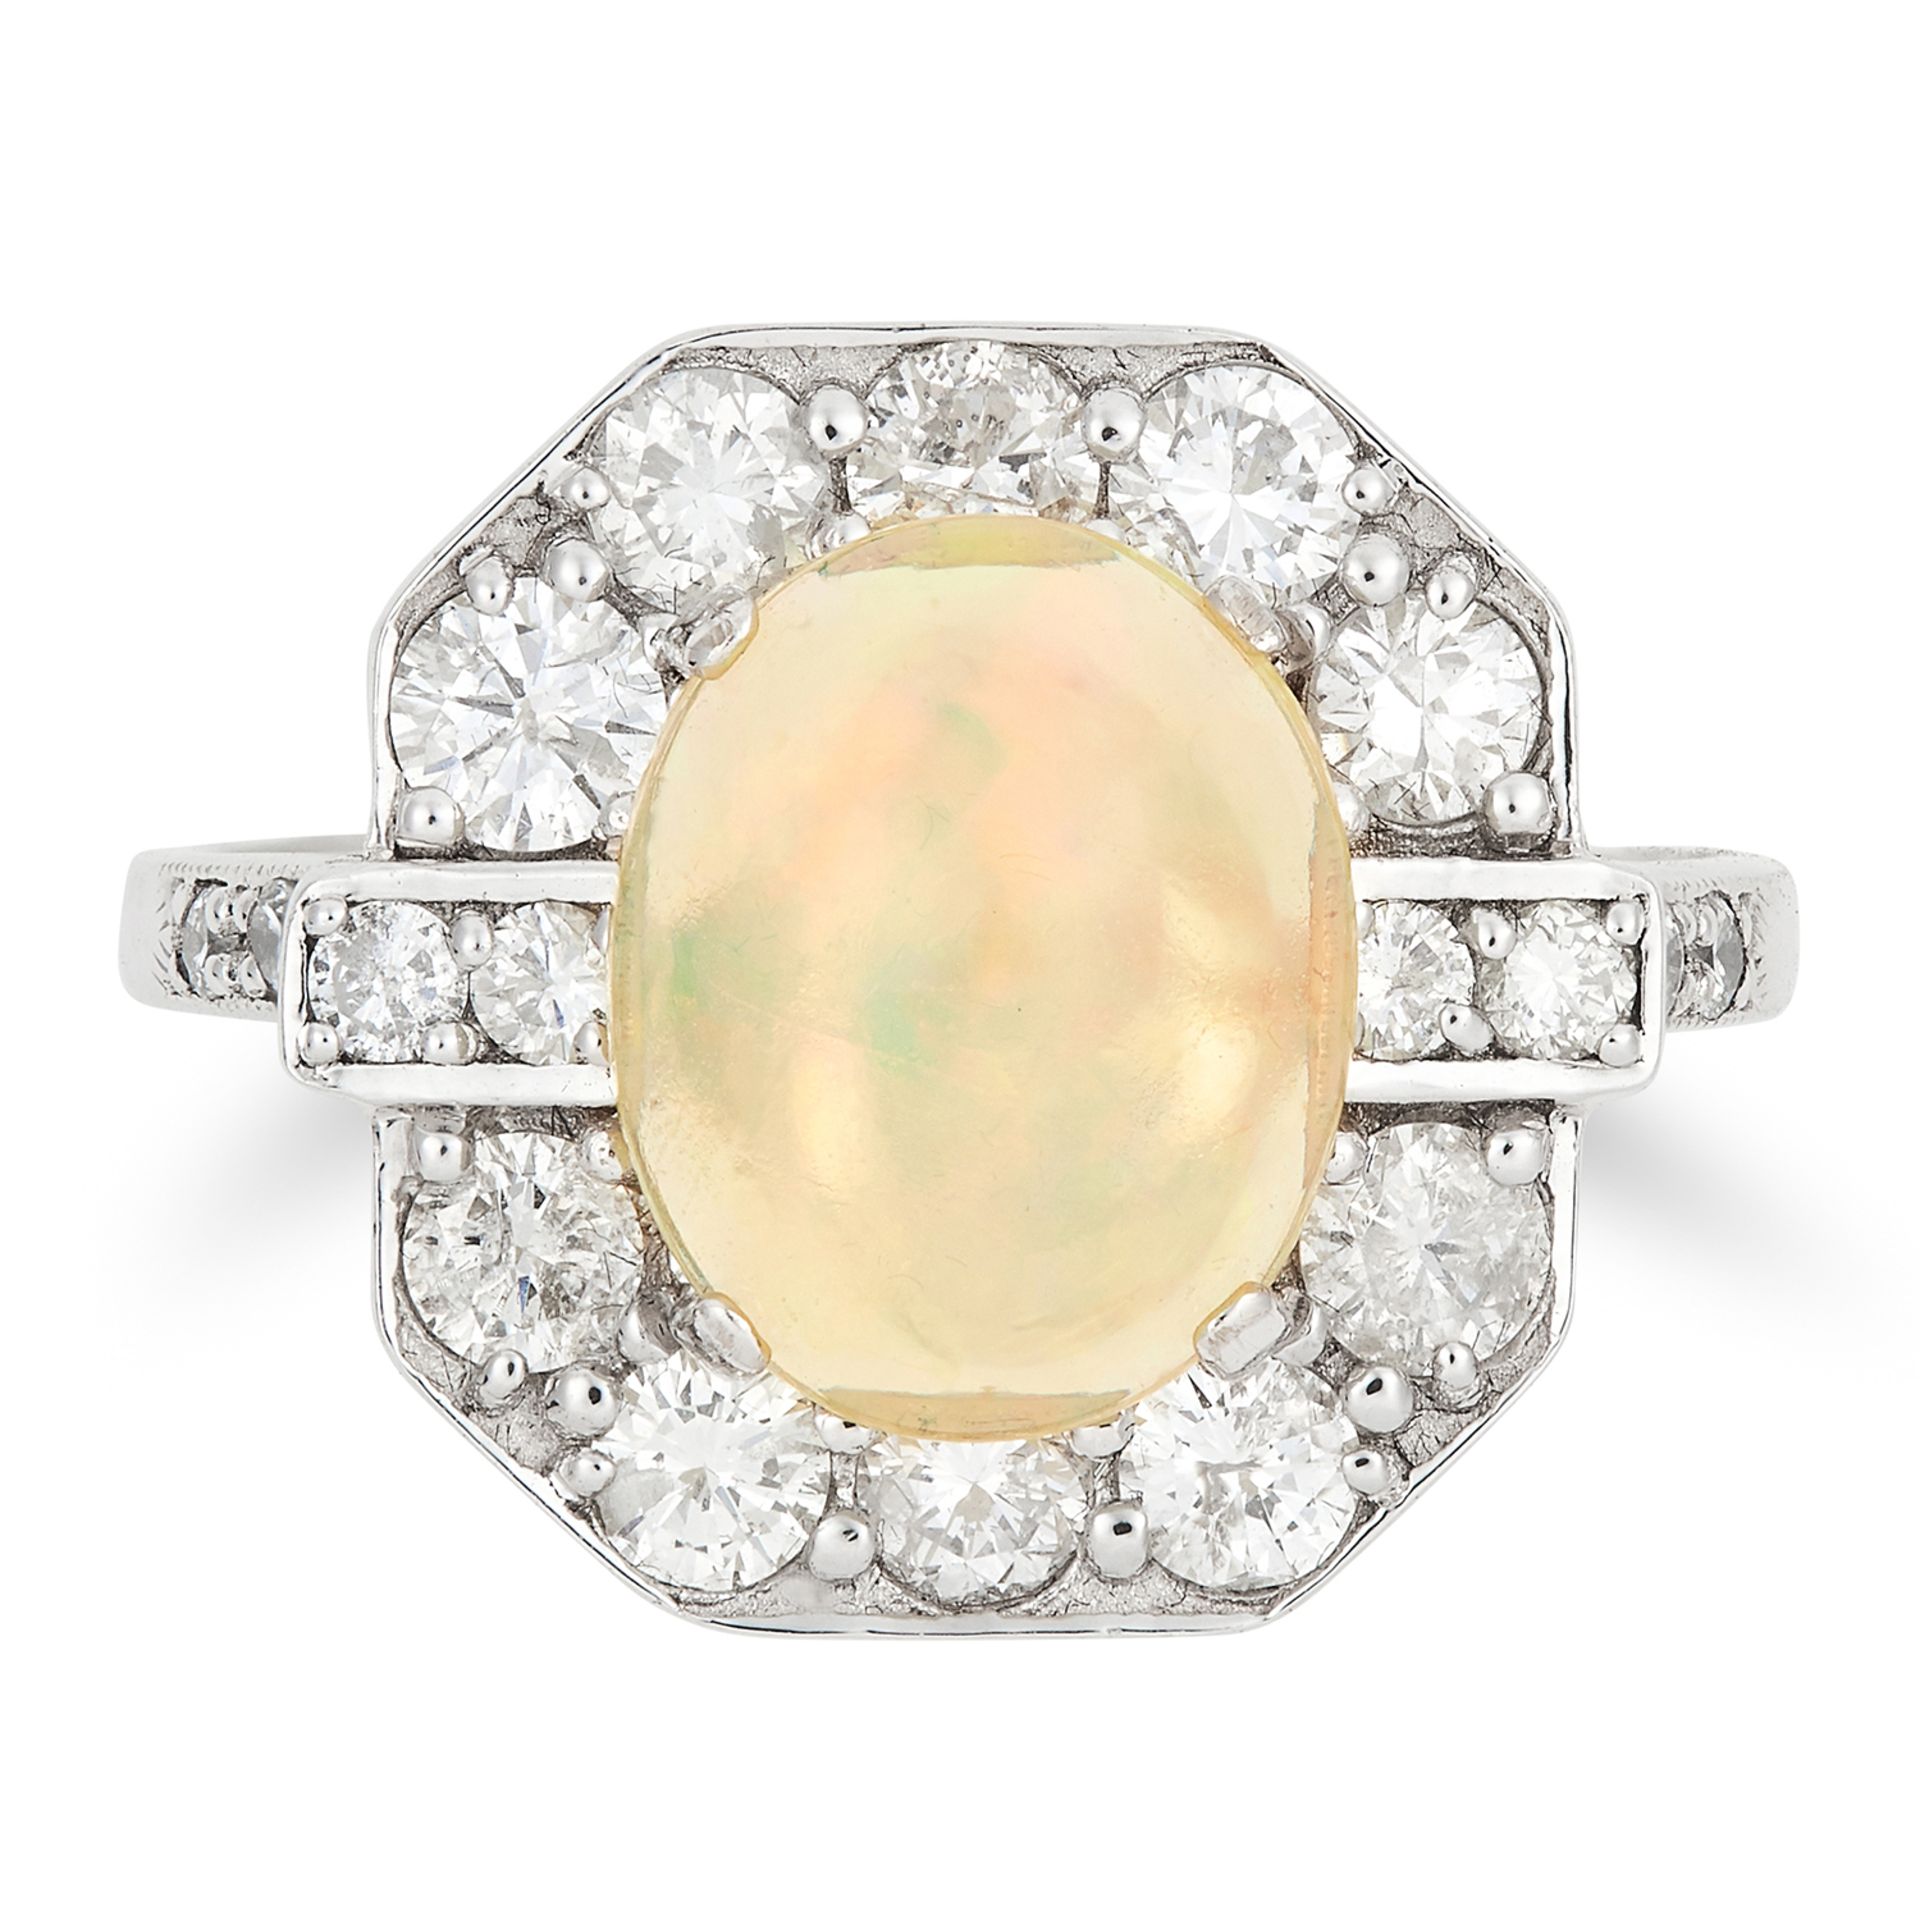 OPAL AND DIAMOND RING in Art Deco style, set with a cabochon opal in a border of round cut